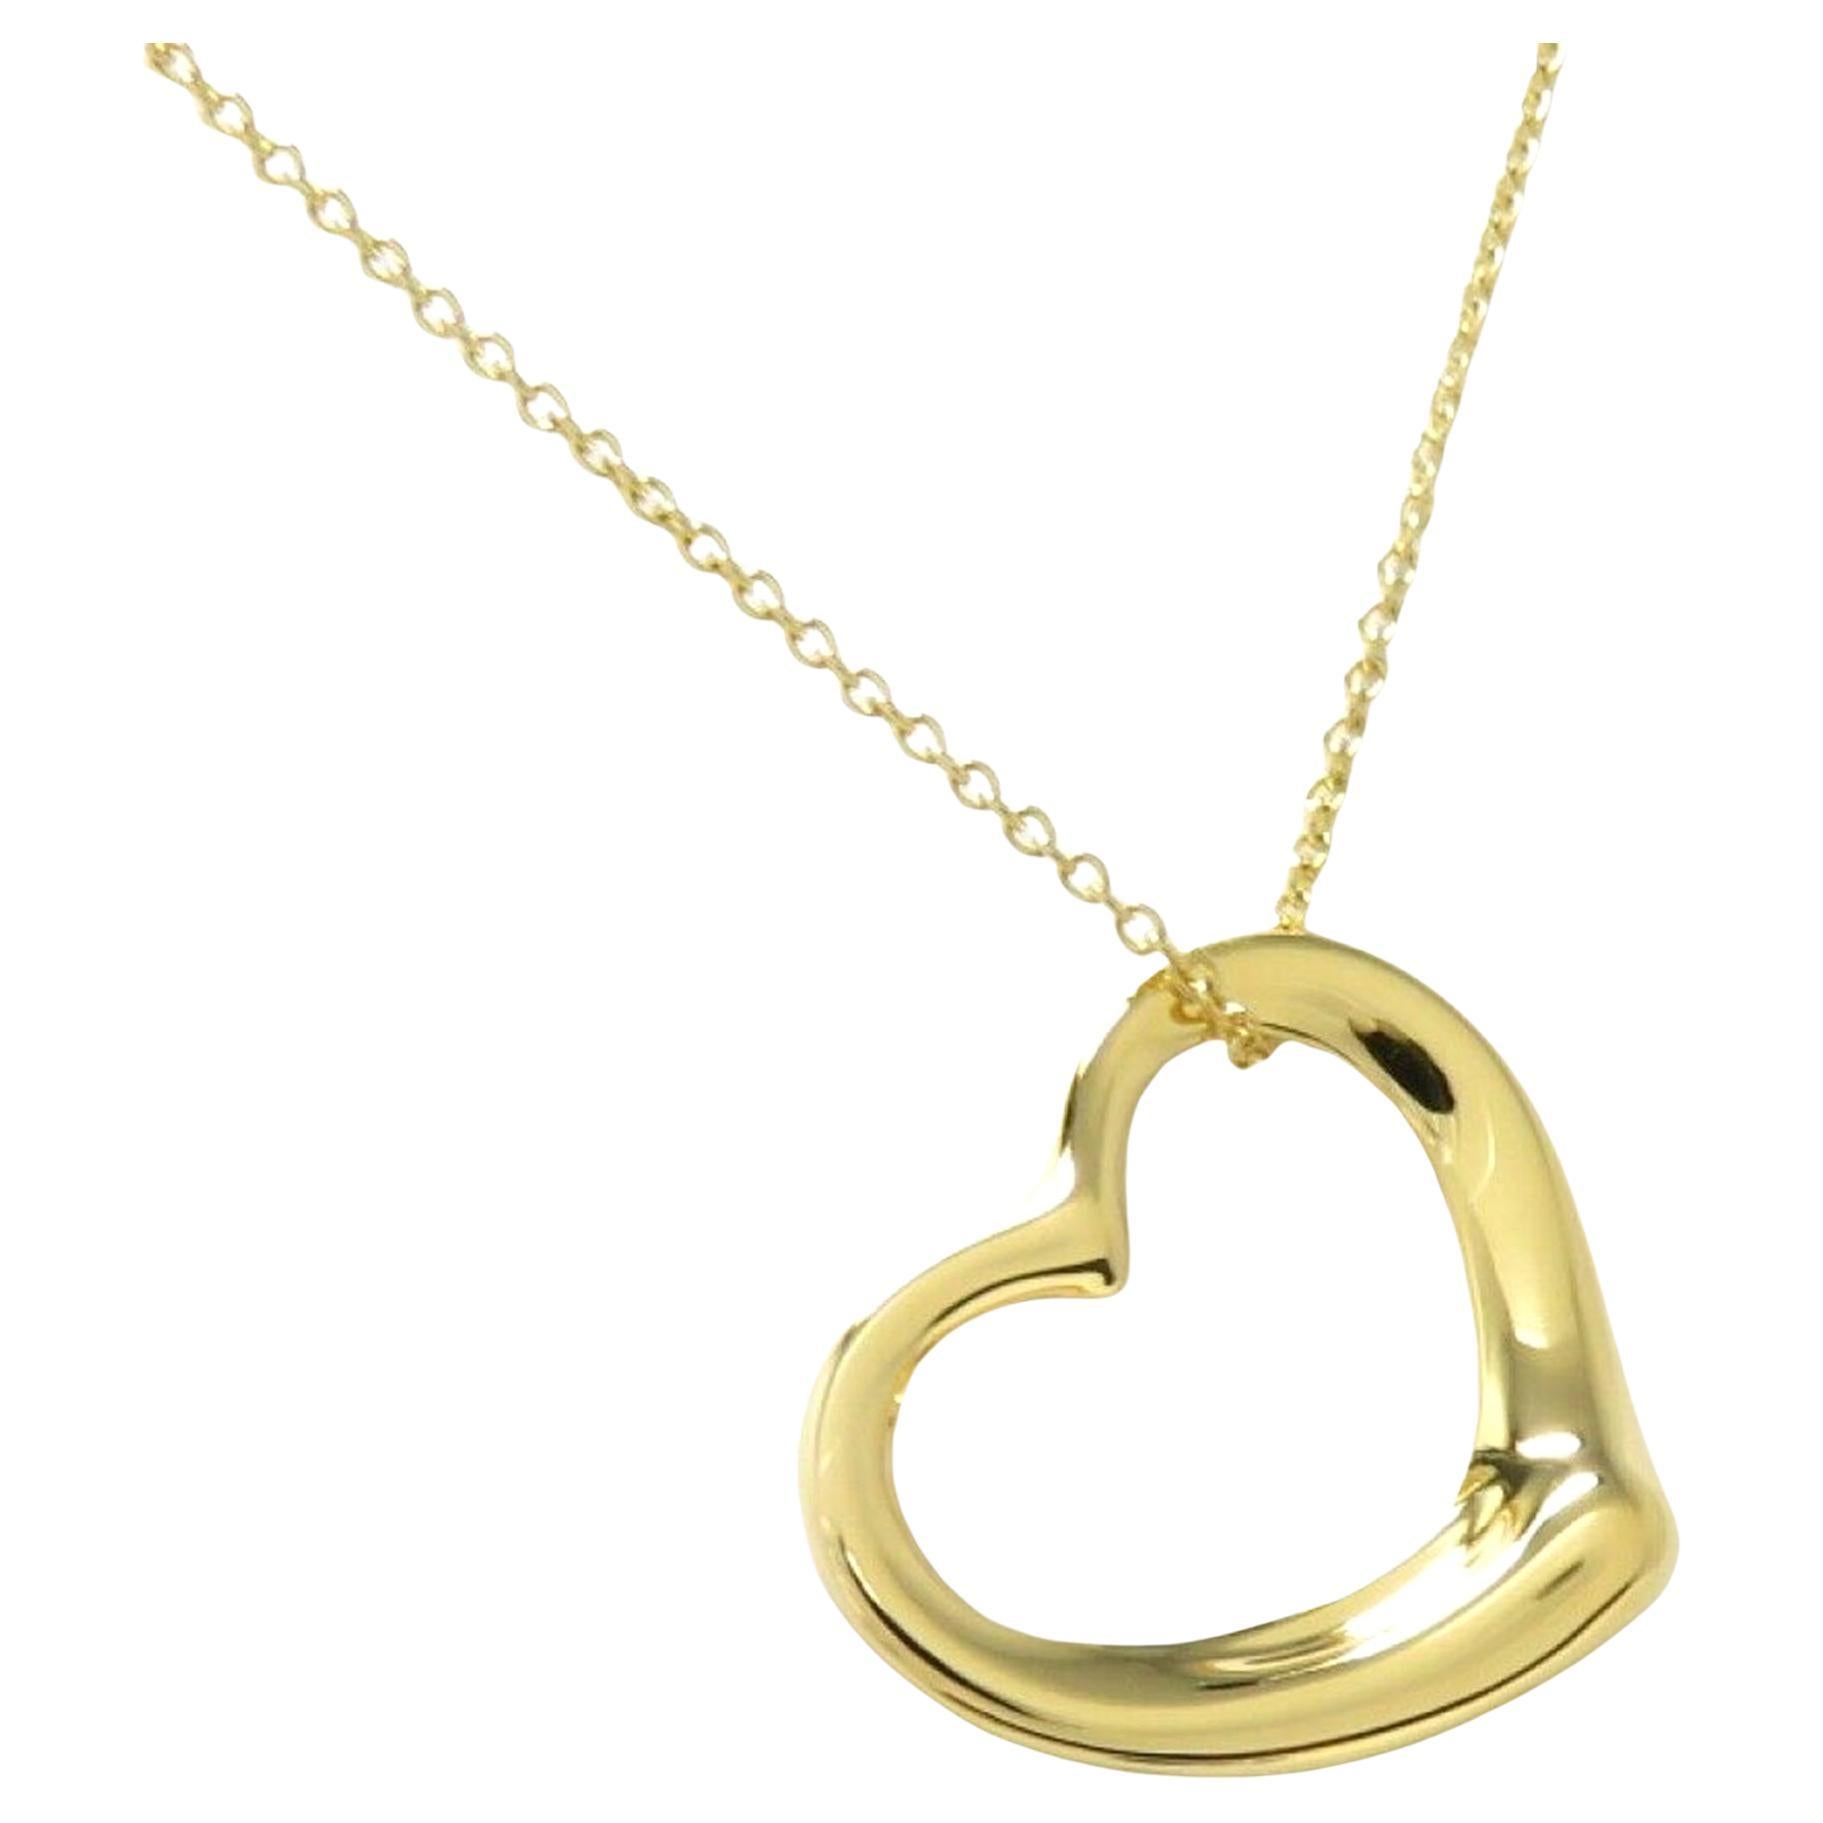 Authentic Tiffany & Co Elsa Peretti® 18K Yellow Gold Small Open Heart Pendant / Necklace.

 The chain with pendant weigh 2.8 grams. Pendant in 18k gold. Size Small, on a 15